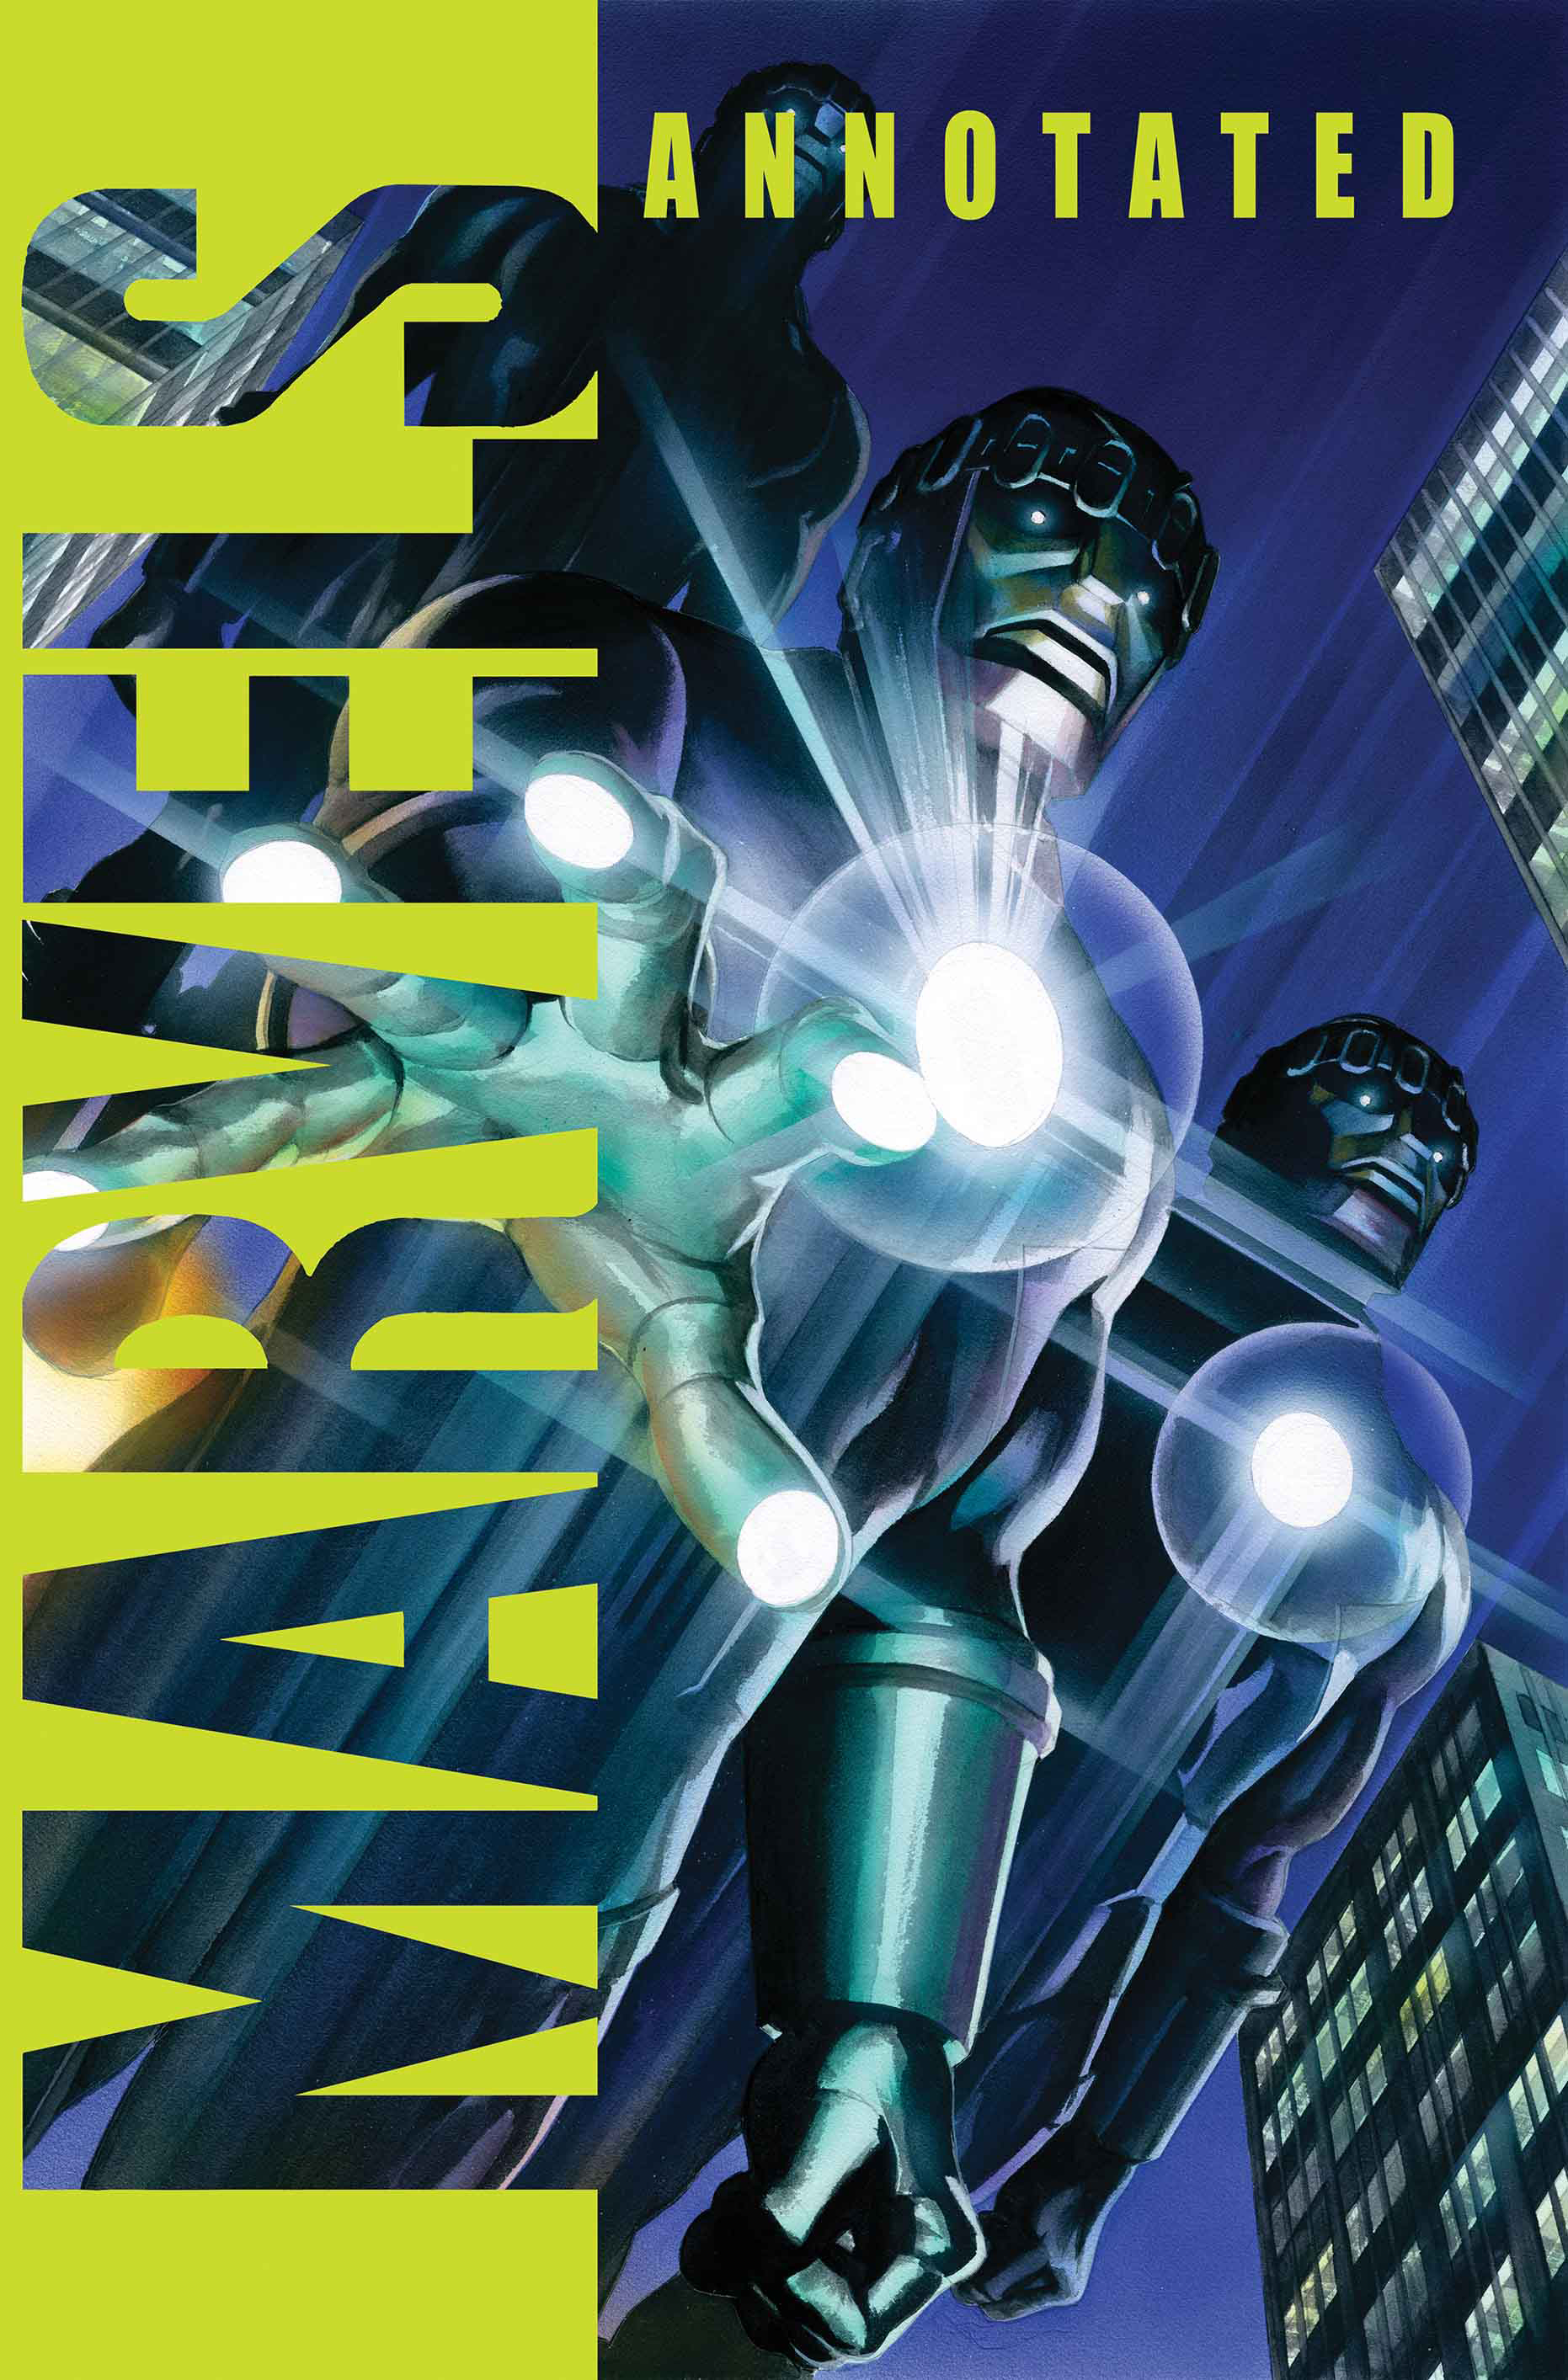 Marvels Annotated no. 2 (2 of 4) (2019 Series)